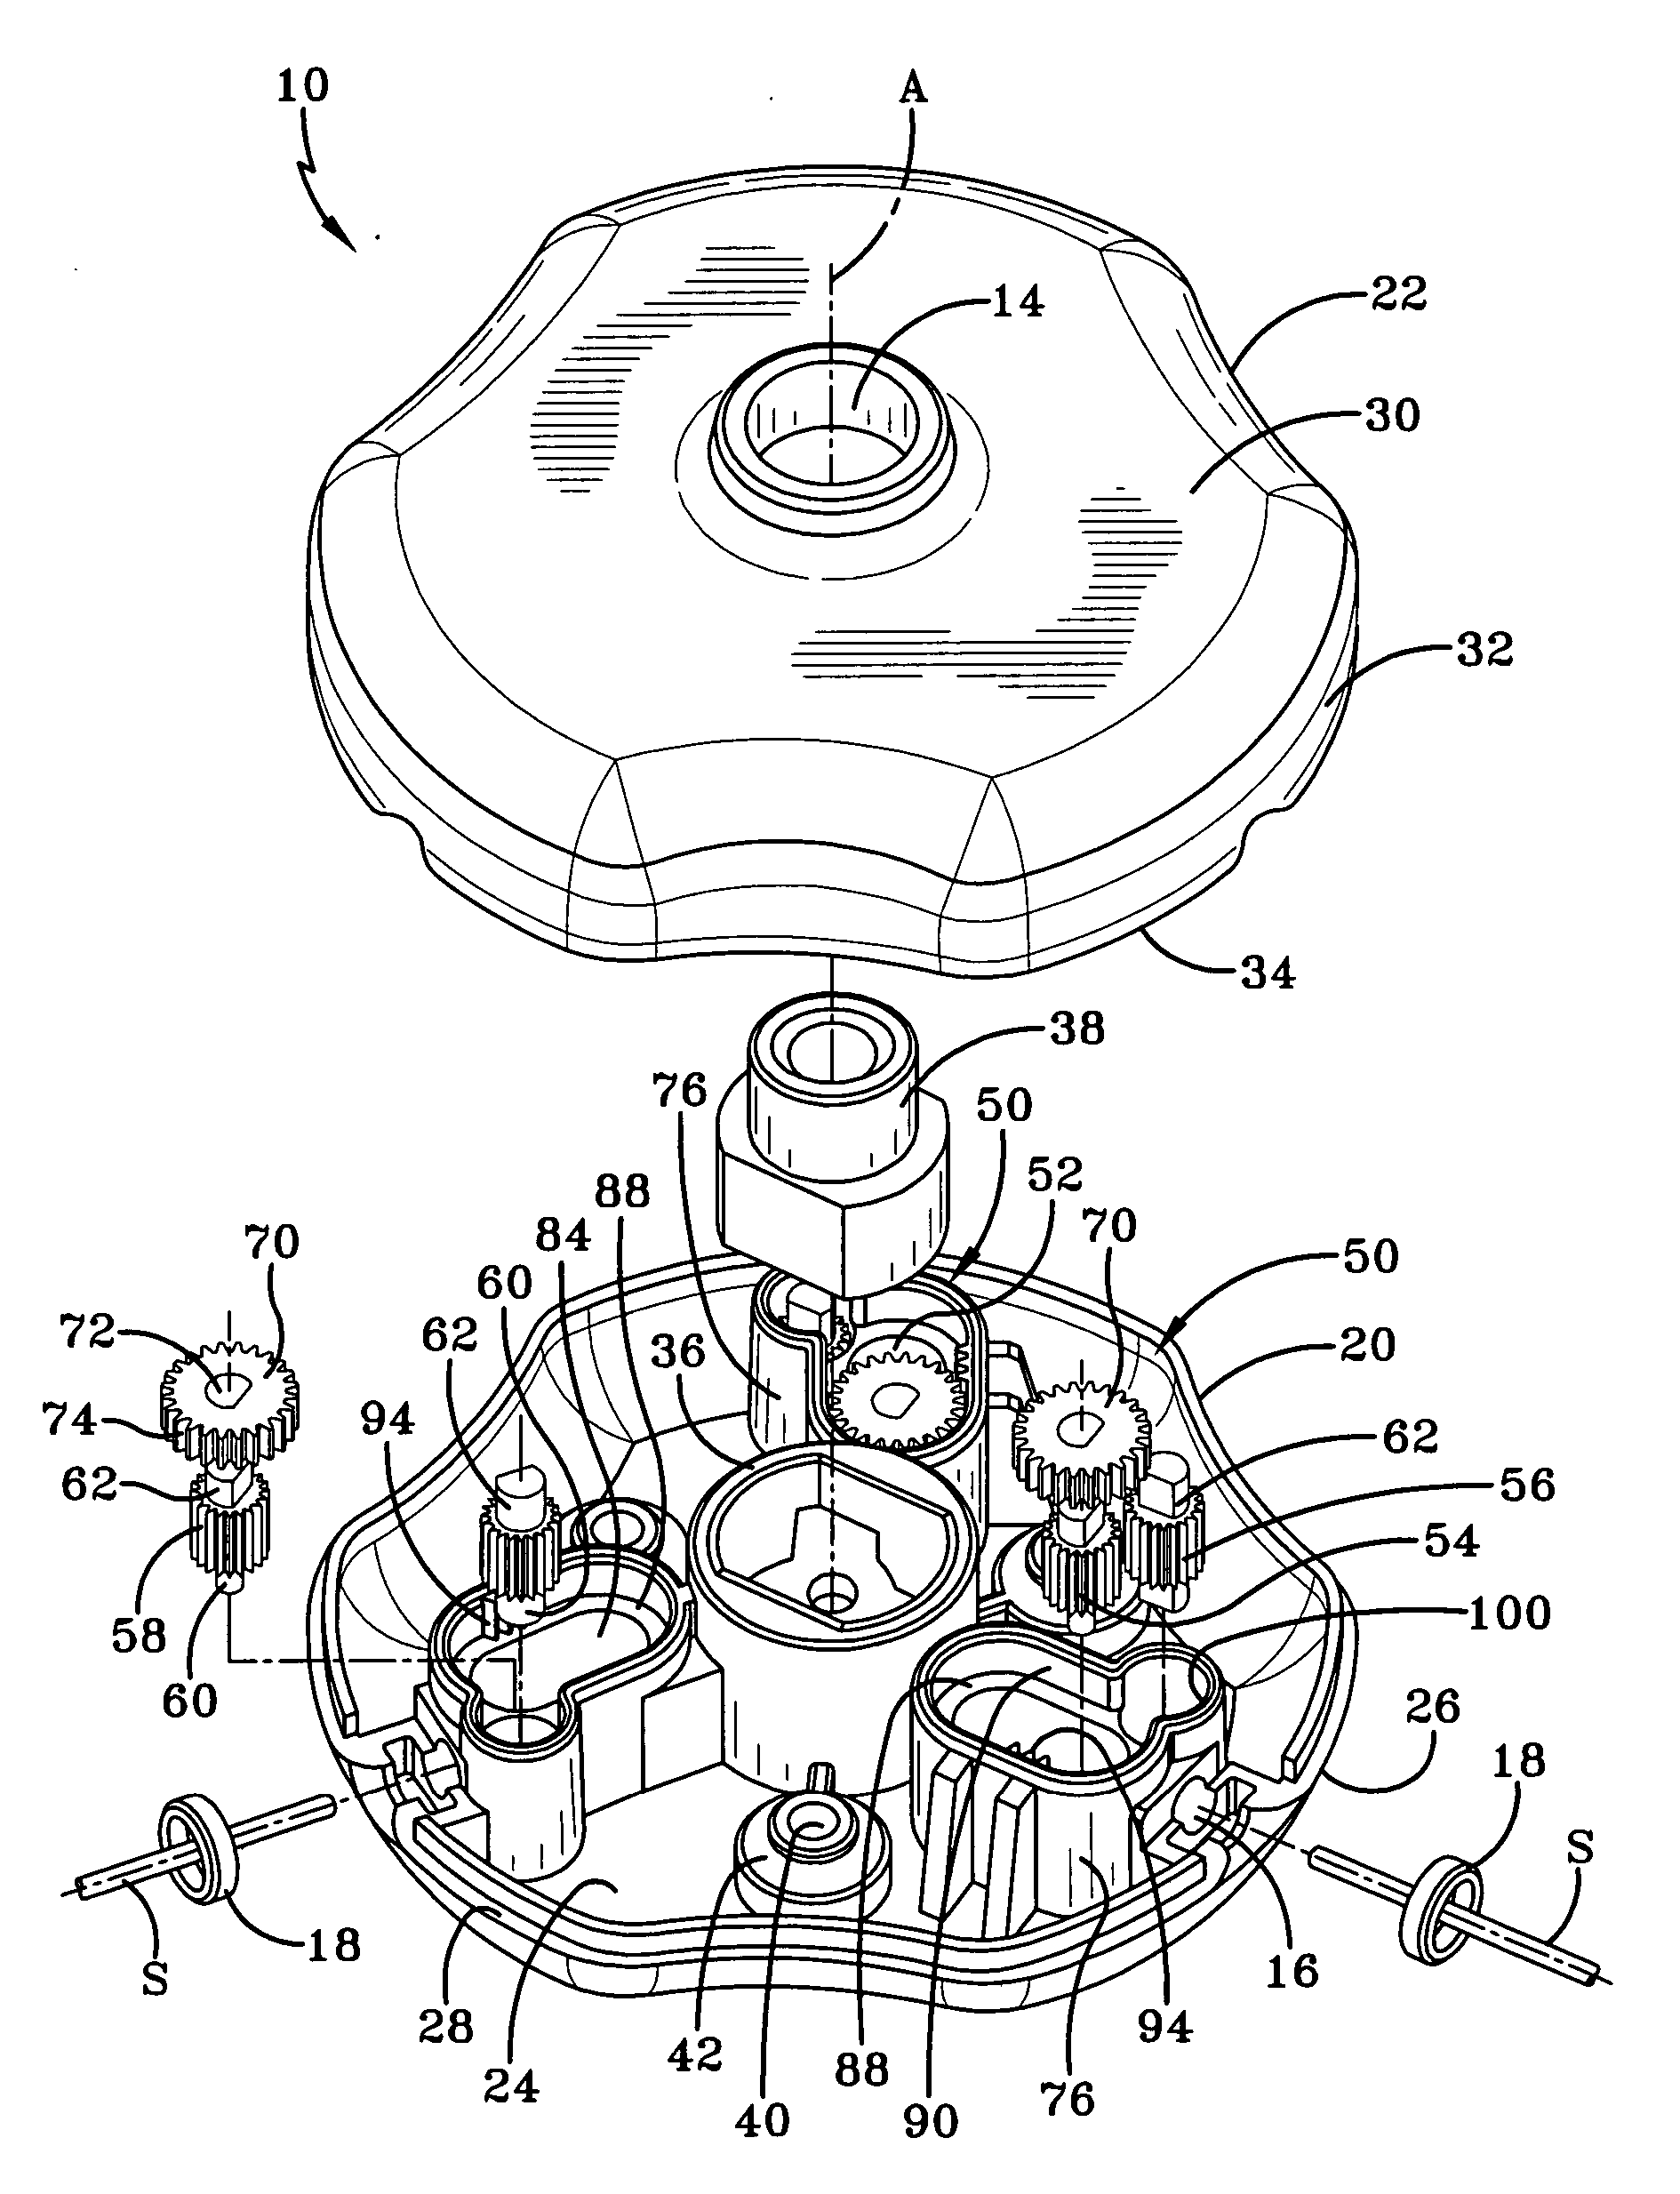 Mechanism for attaching trimmer line strips to a head of a trimming apparatus